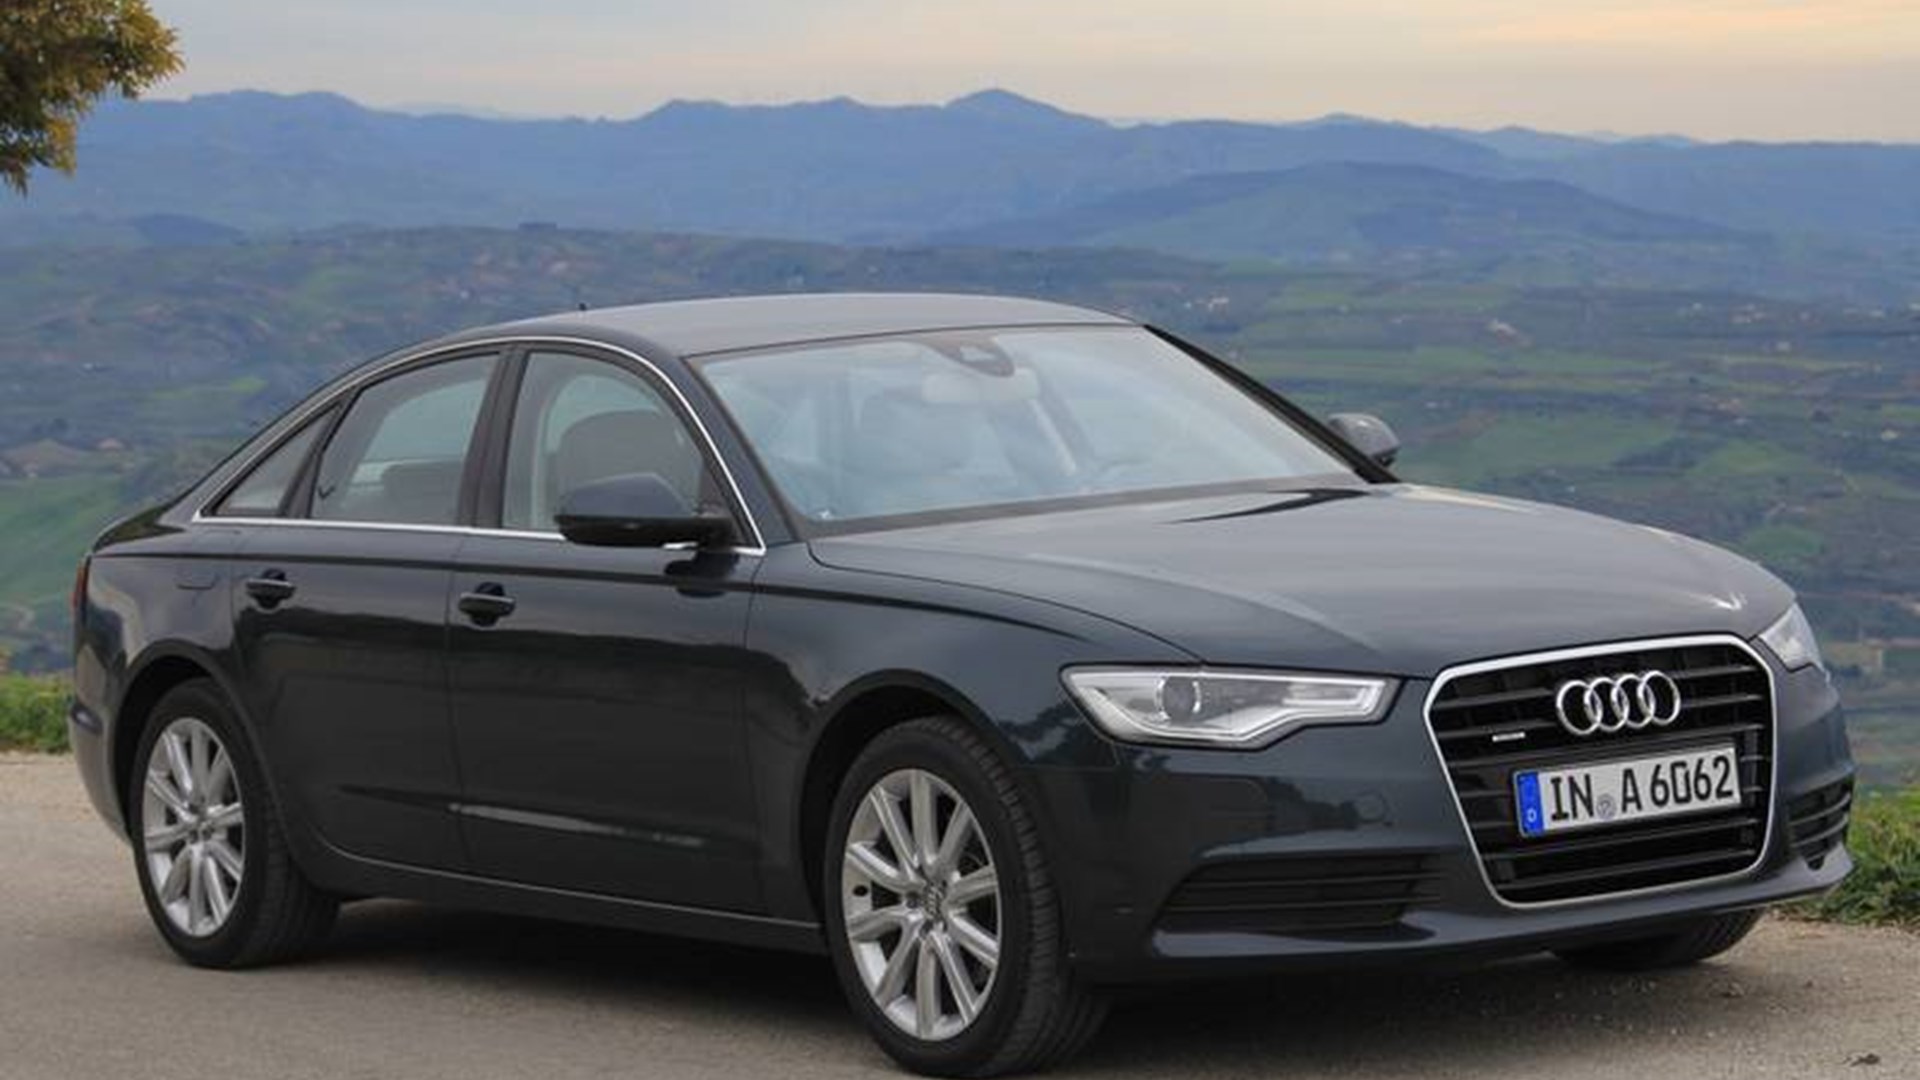 Audi A6, 2012-2017 Used-Vehicle Review | AutoTrader.ca